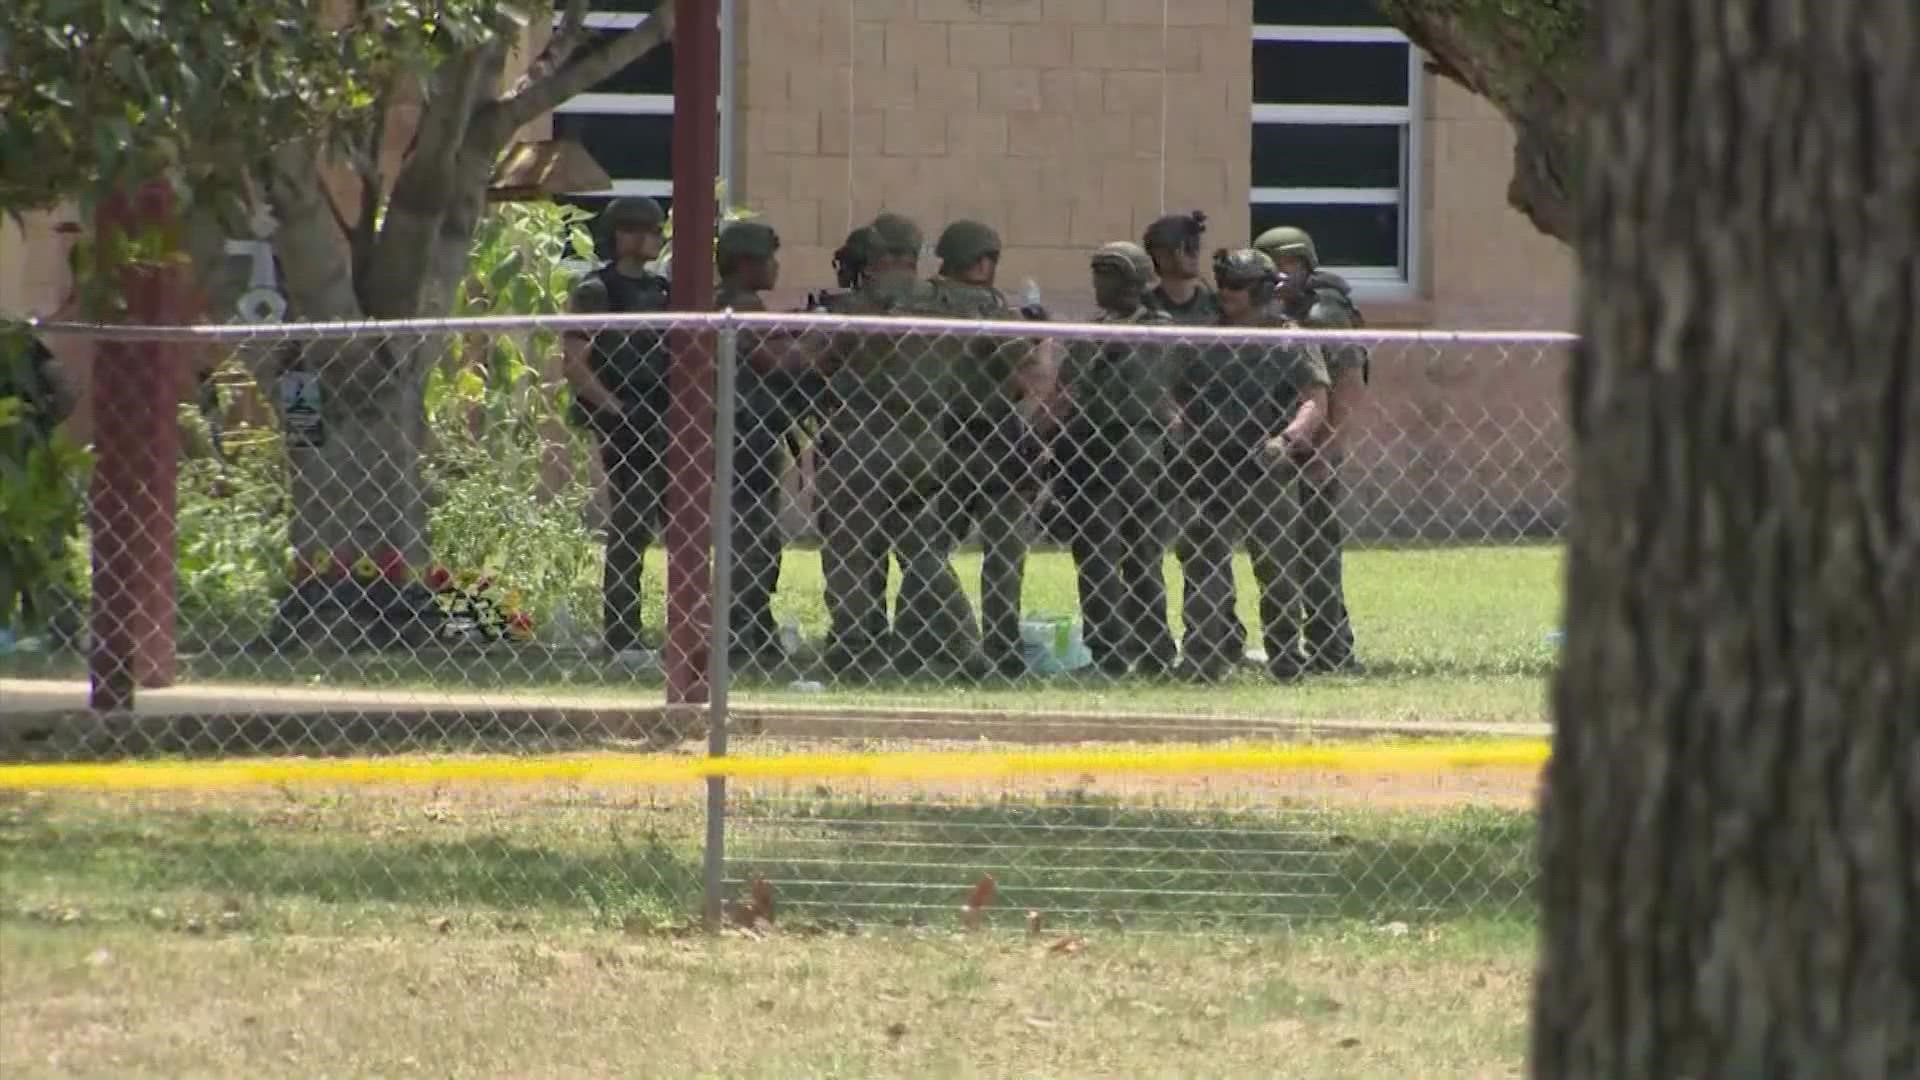 According to one Texas senator, Pete Arredondo -- the school district police chief who oversaw the response -- got to the scene without a police radio.